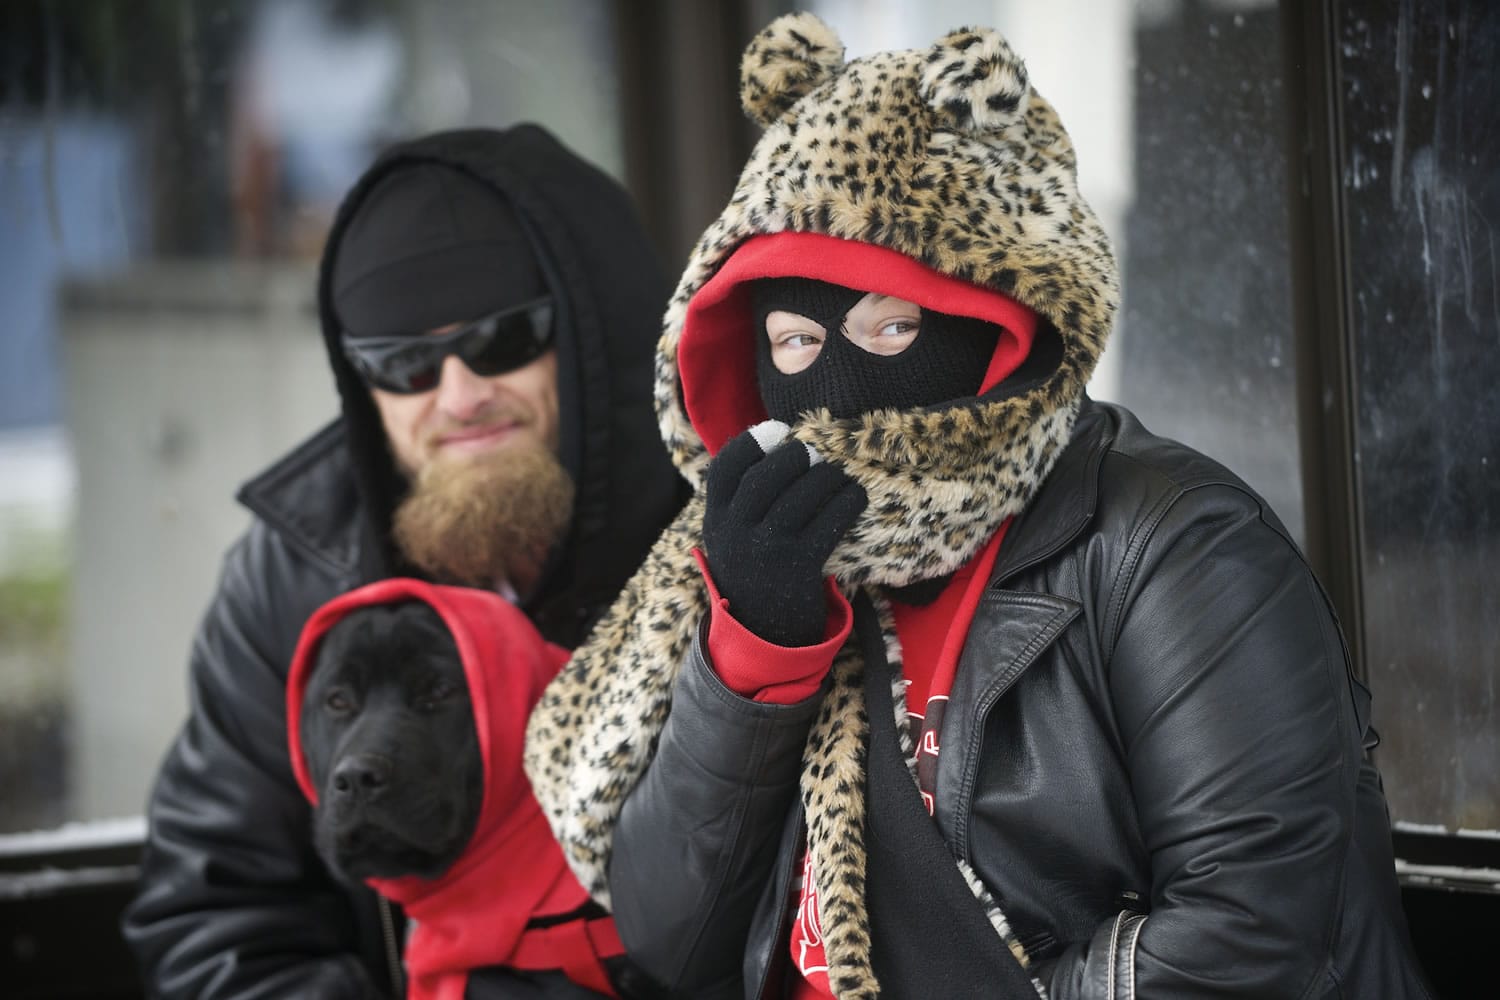 Trisha Pogue, right, covers her face from below-freezing temperatures while waiting for a bus with Joshua Romine and their dog, Leah, in Vancouver on Friday.